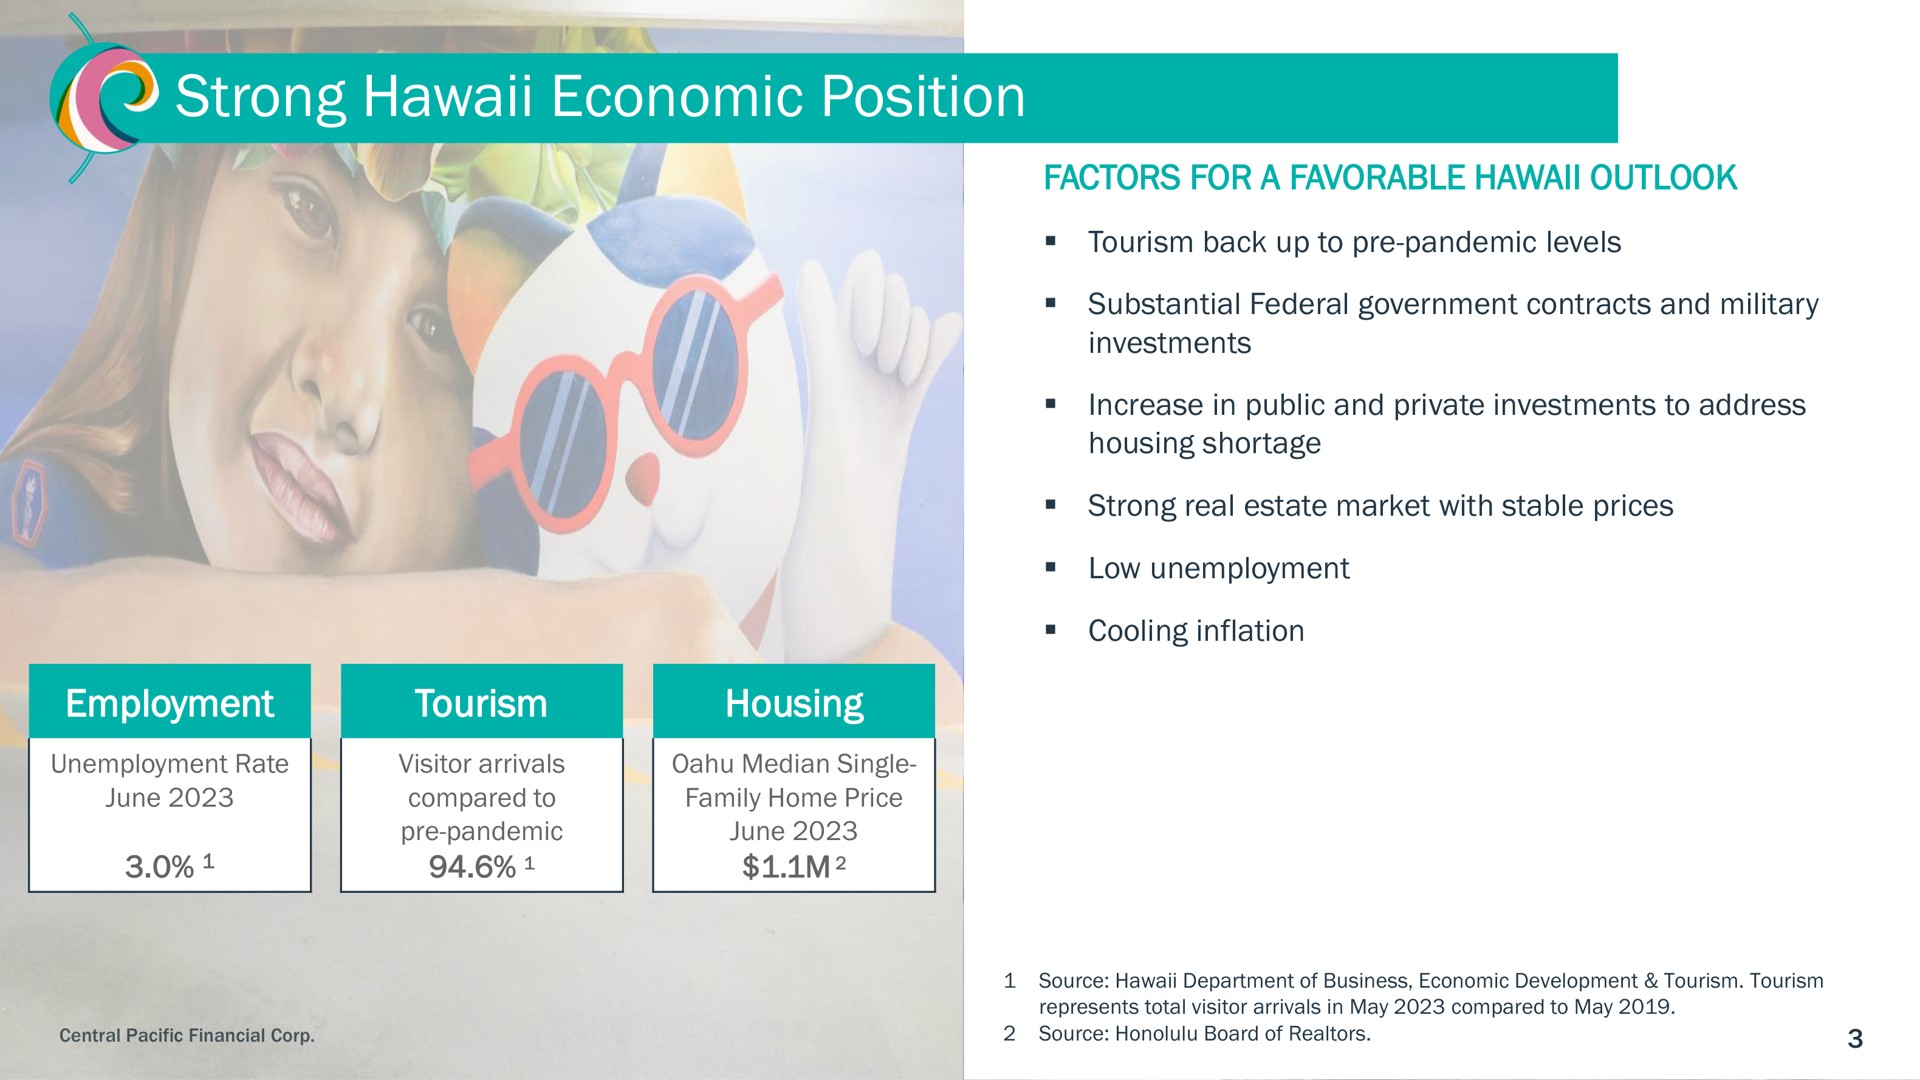 strong economic position | Central Pacific Financial